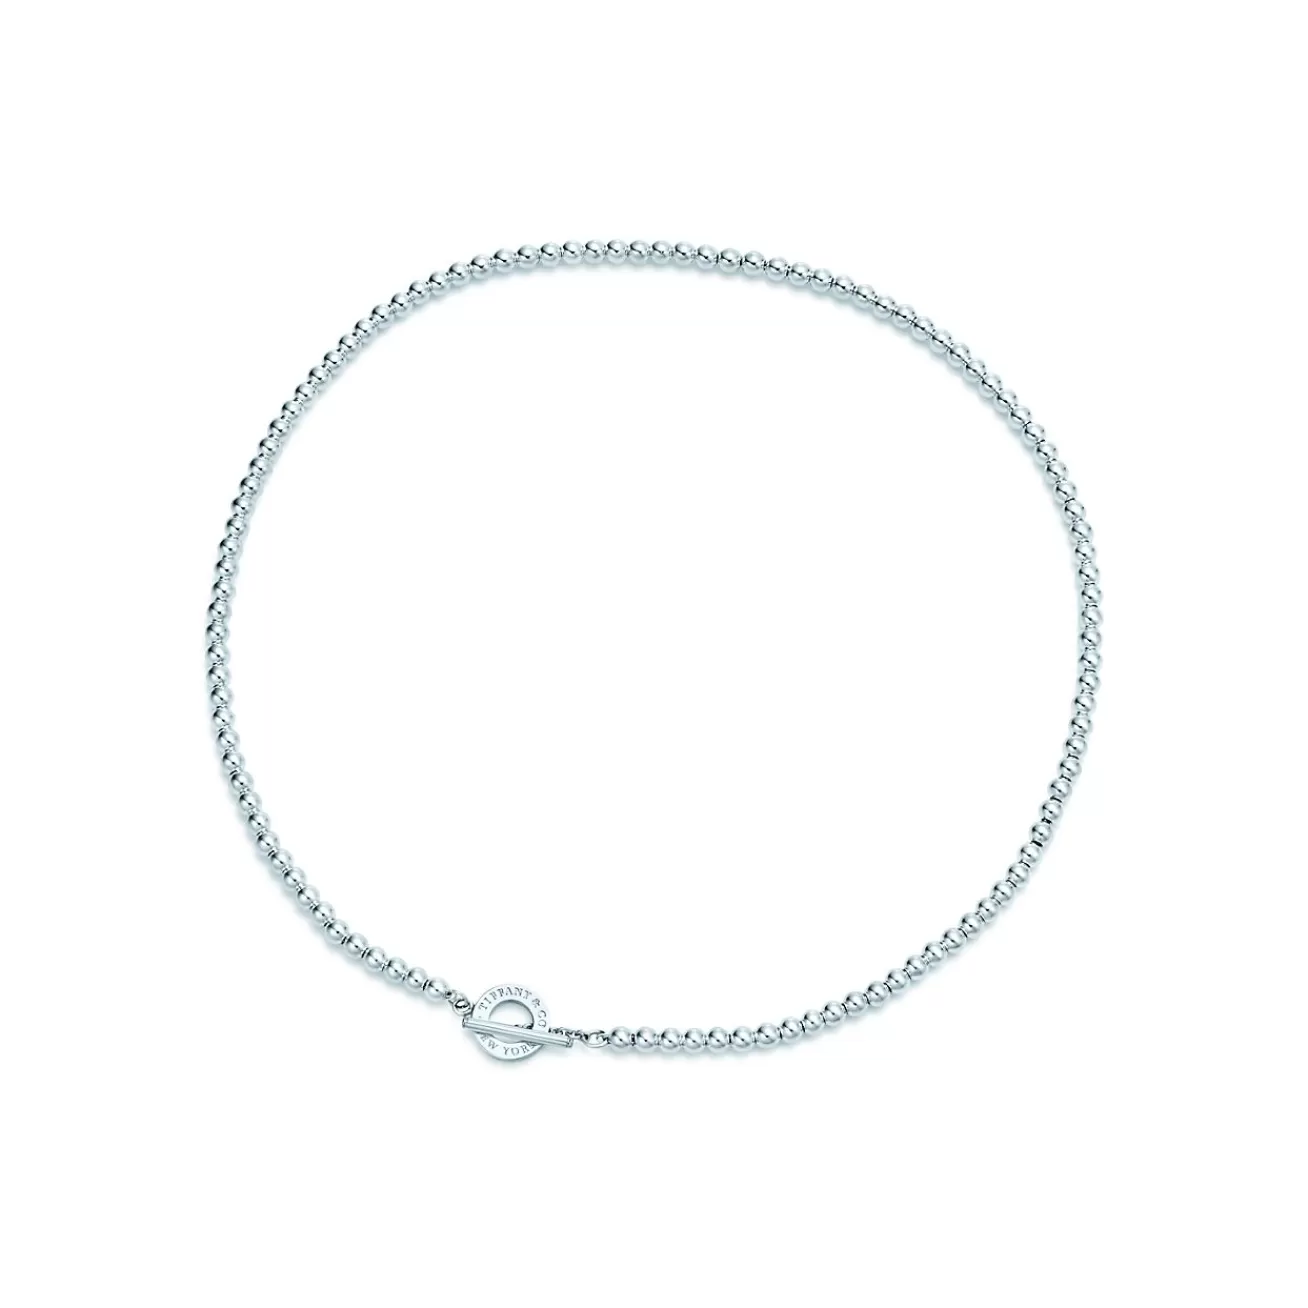 Tiffany & Co. Toggle Bead Necklace in Sterling Silver, 4 mm | ^ Necklaces & Pendants | Gifts for Her